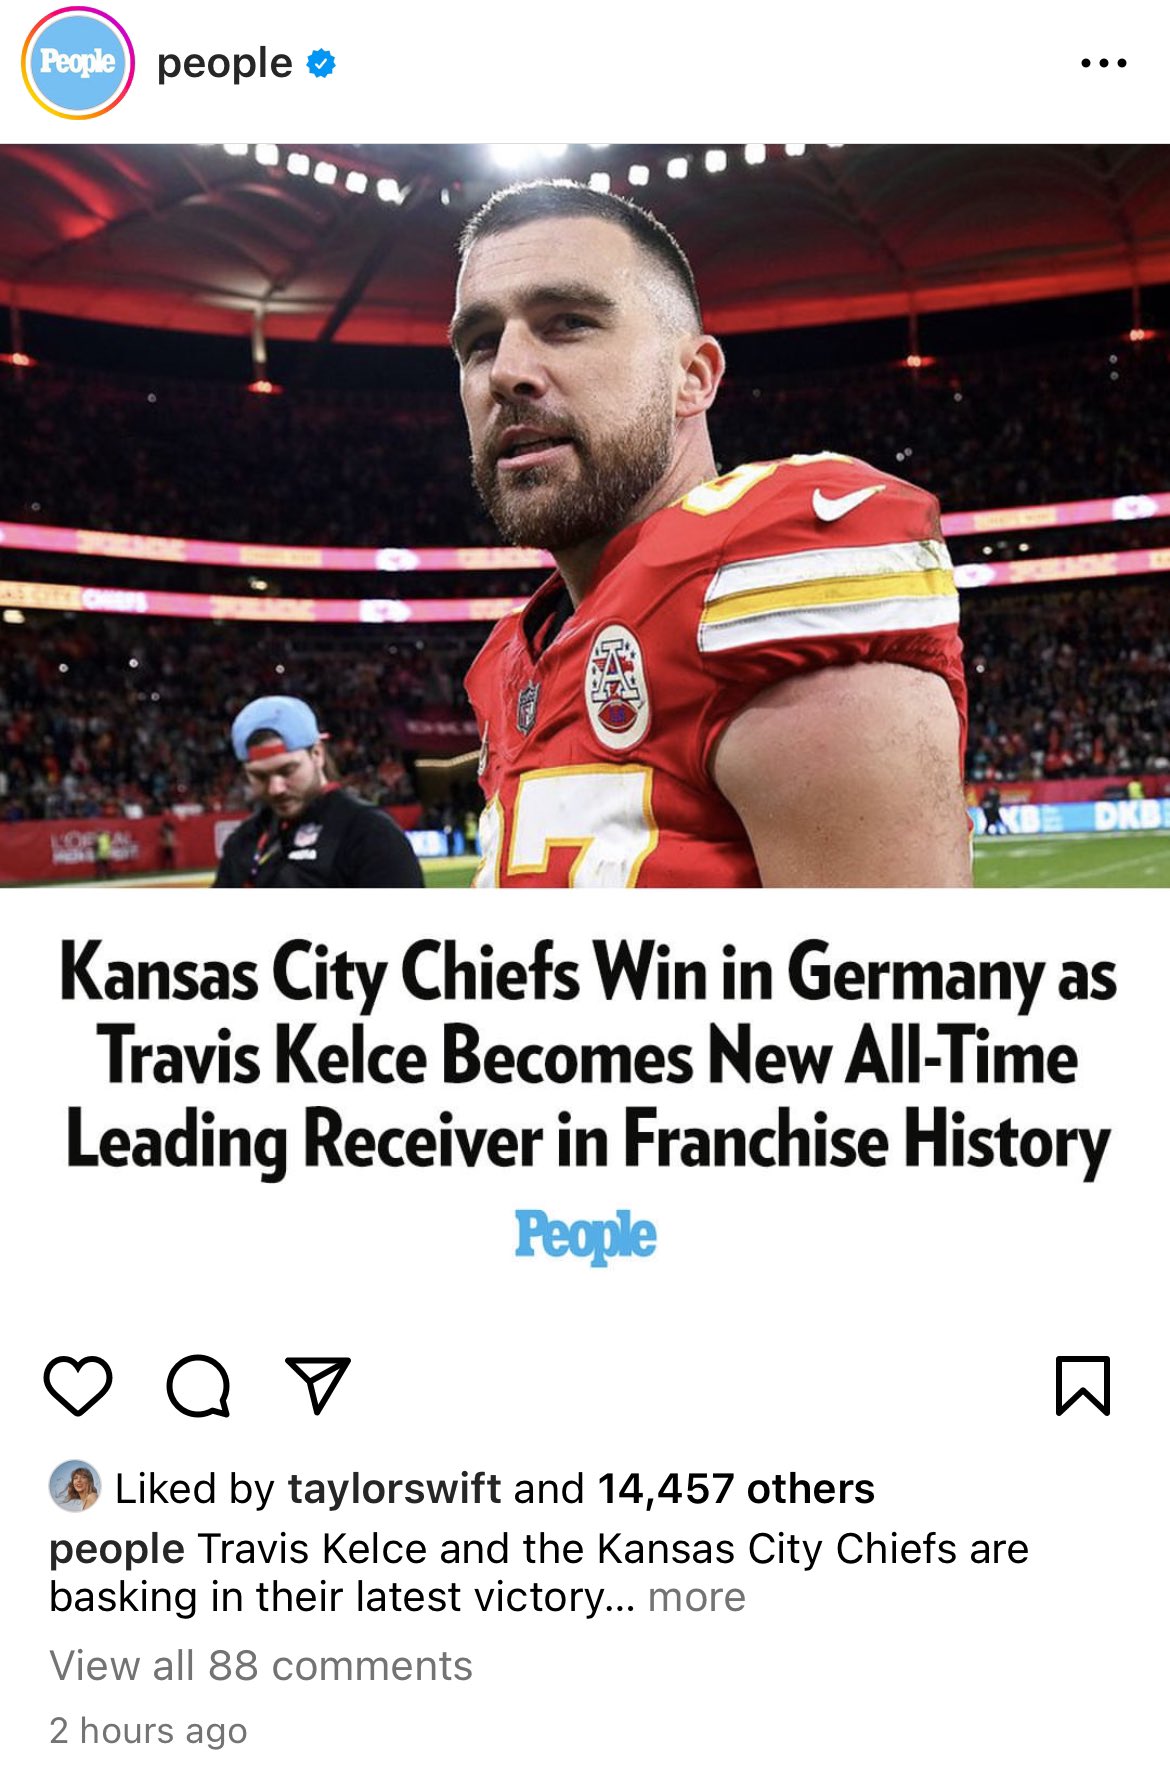 Kansas City Chiefs Win in Germany, Travis Kelce Becomes All-Time